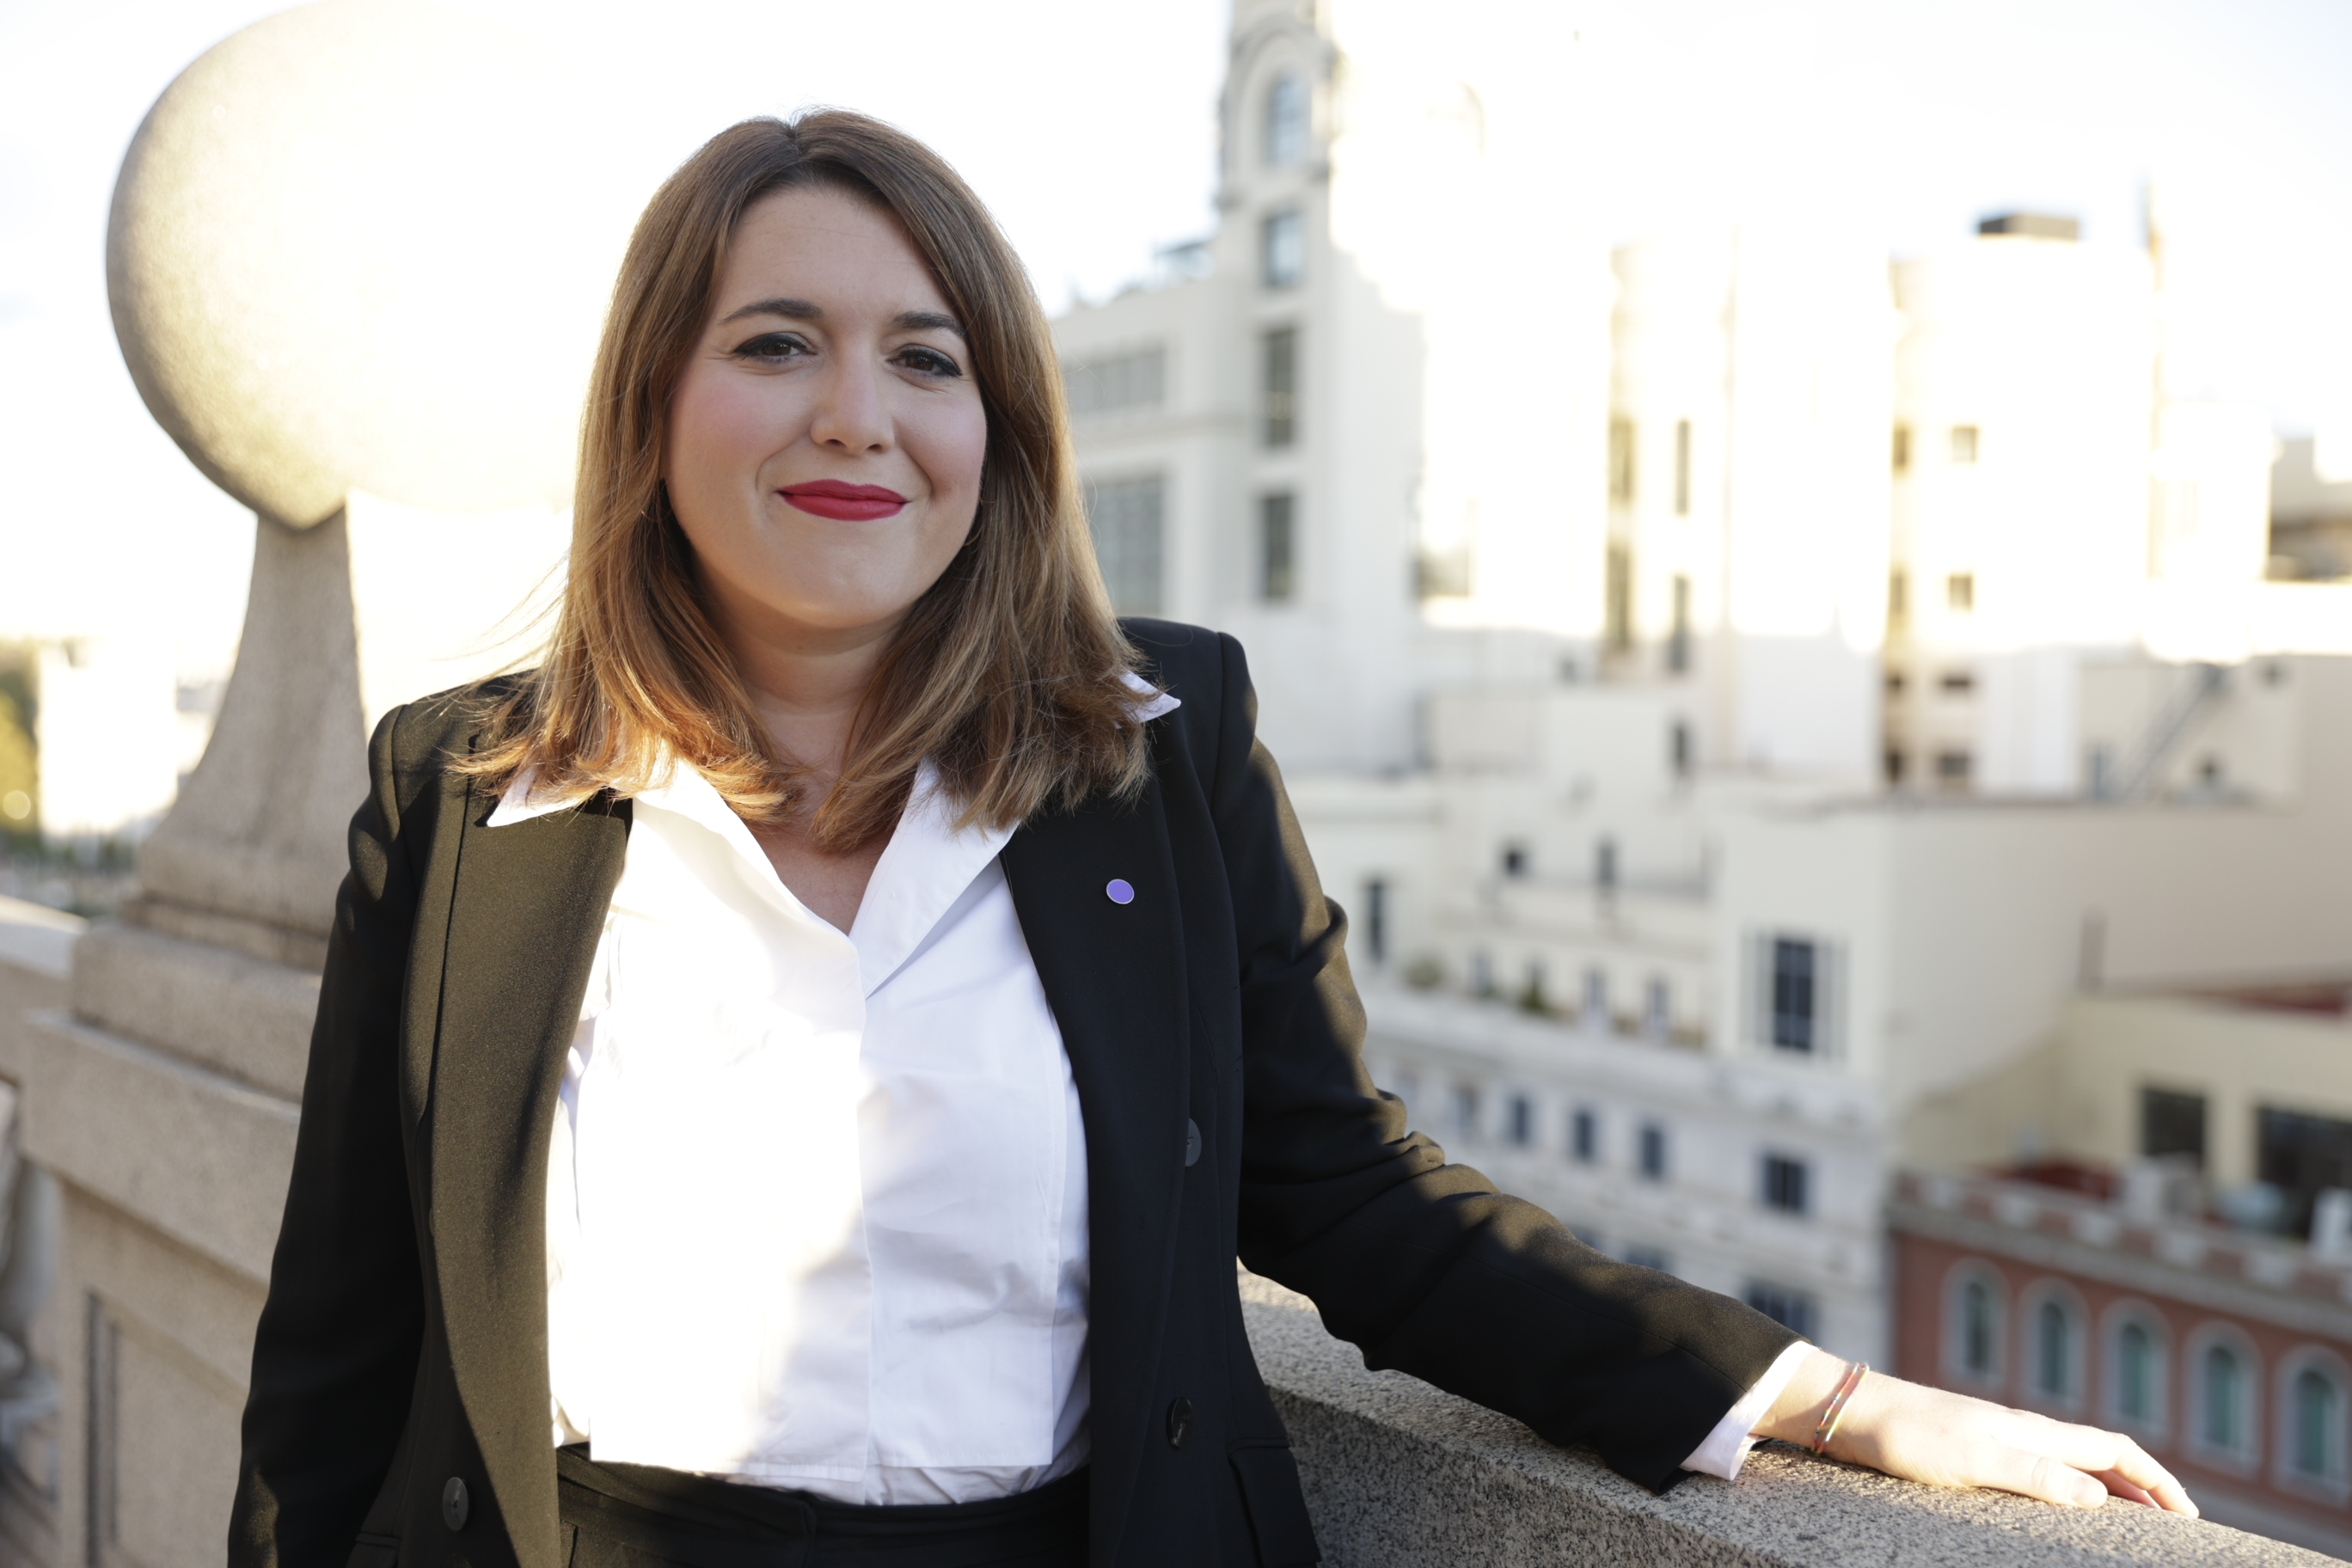 Interview with the Secretary of State for Equality Ángela Rodríguez.